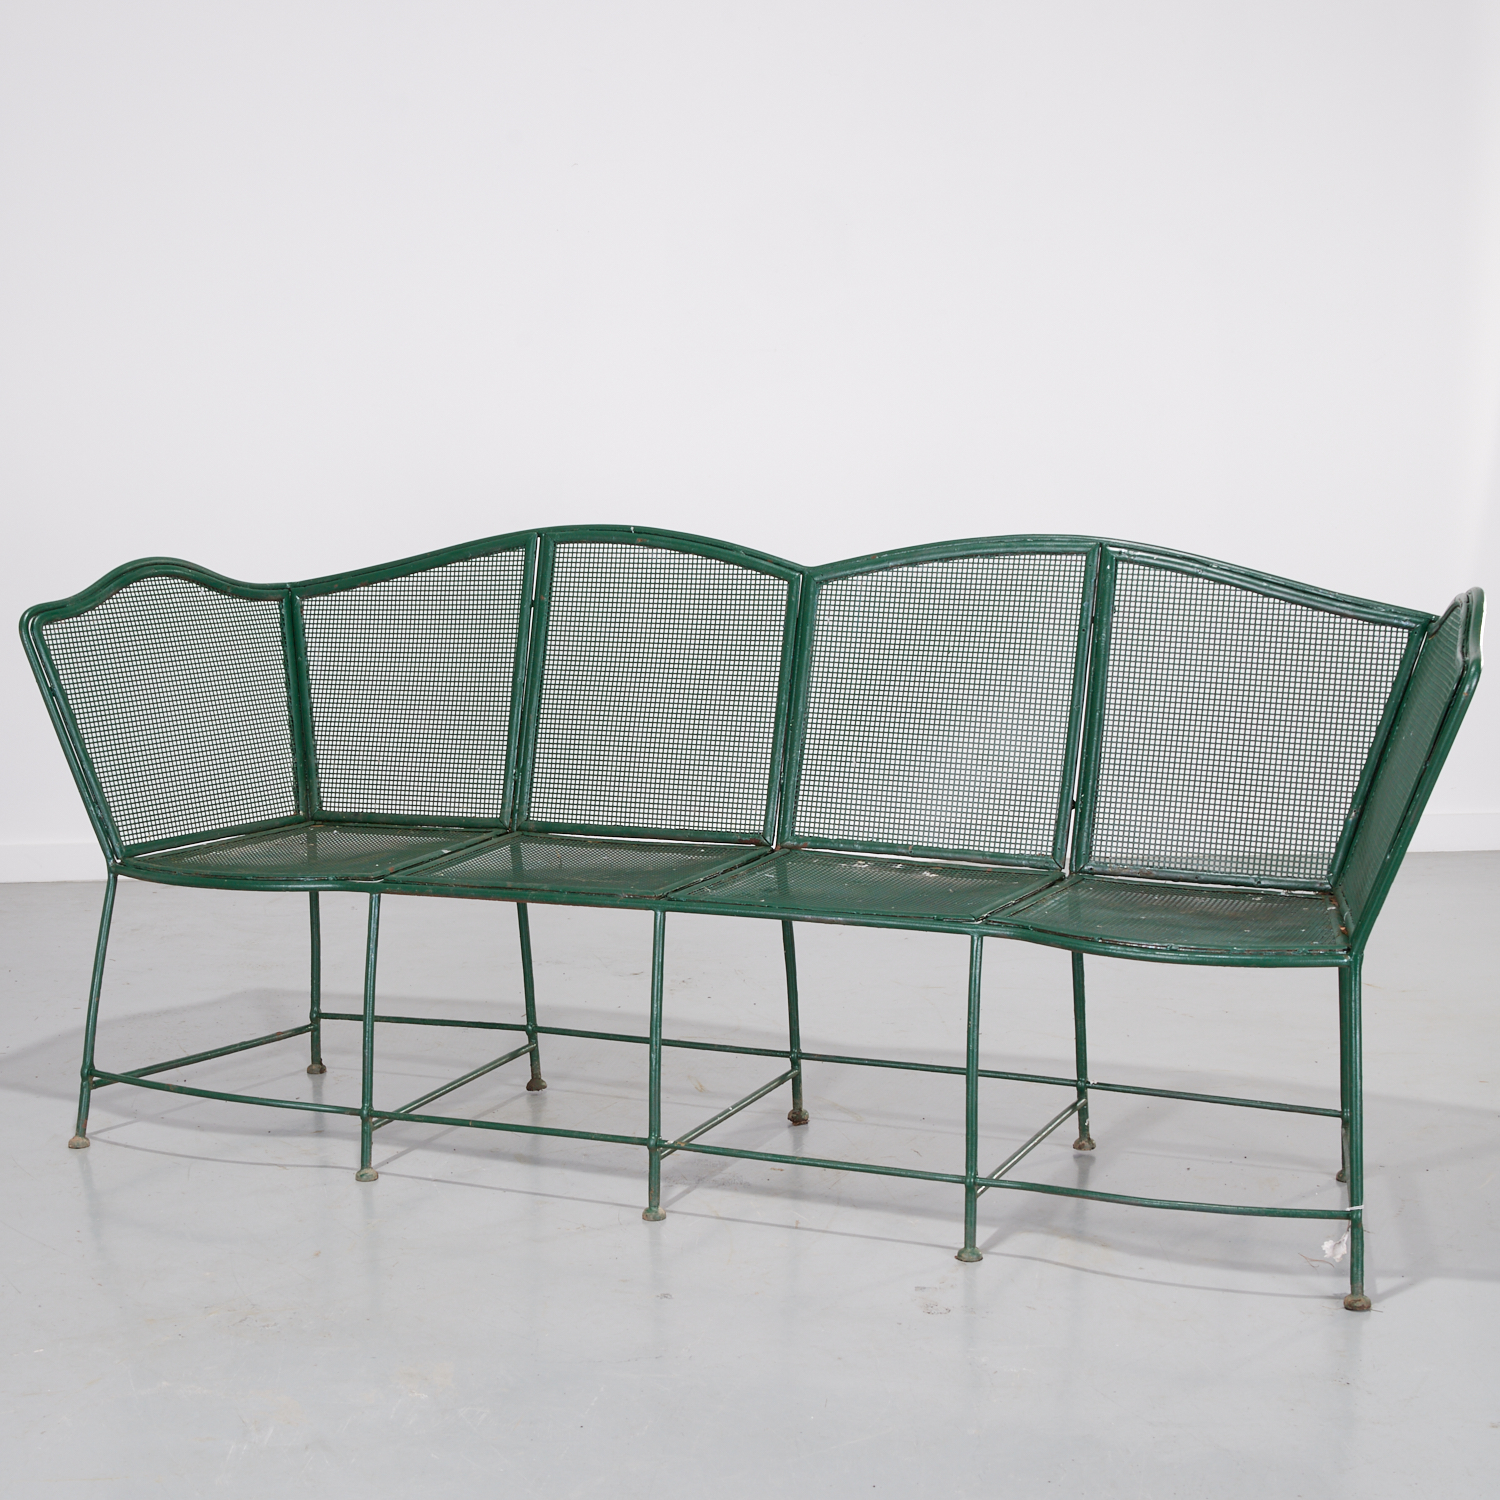 FRENCH MID-CENTURY GREEN PAINTED